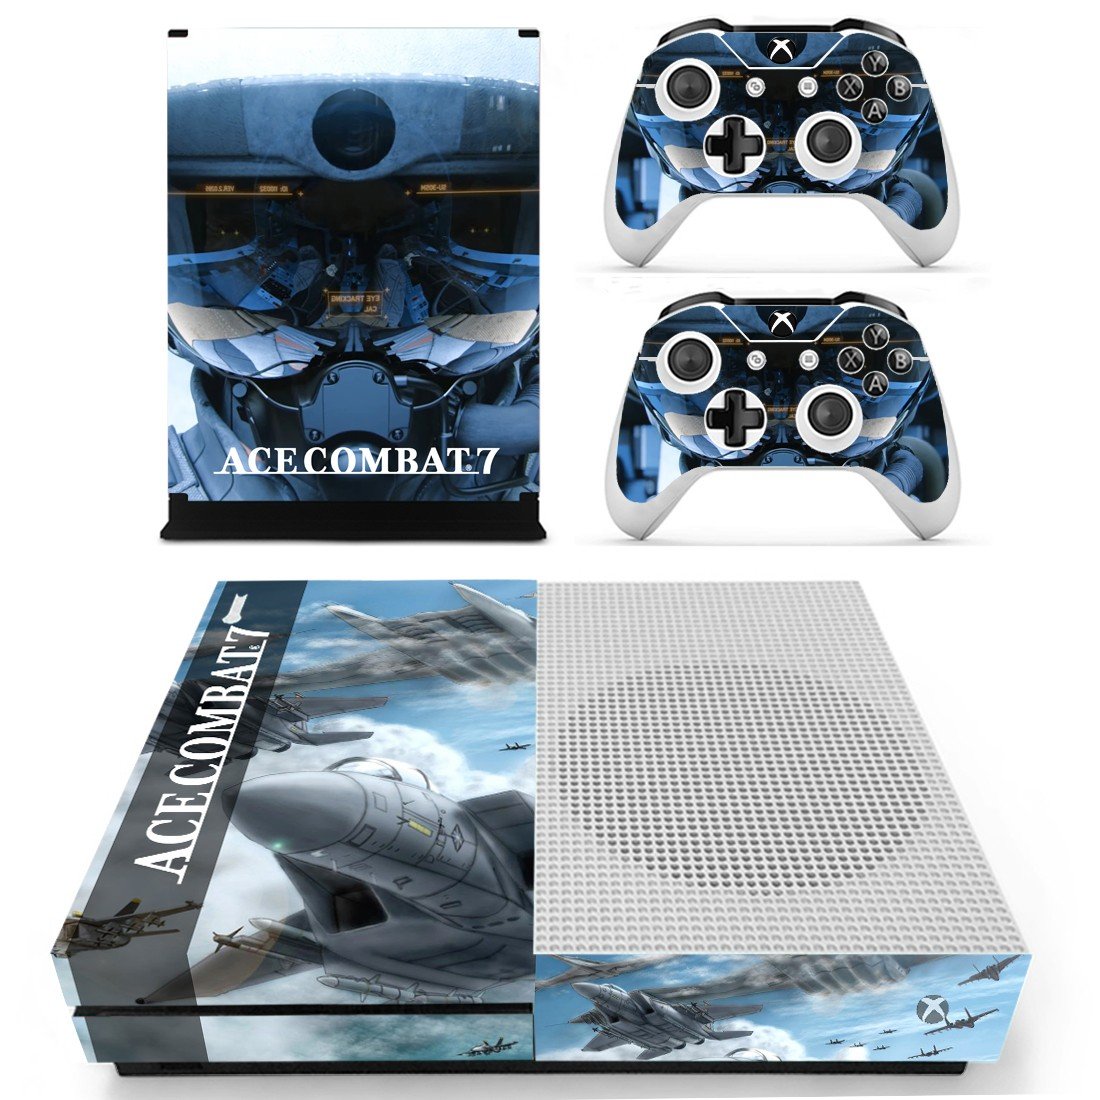 ACE Combat 7 Cover For Xbox One S Design 1